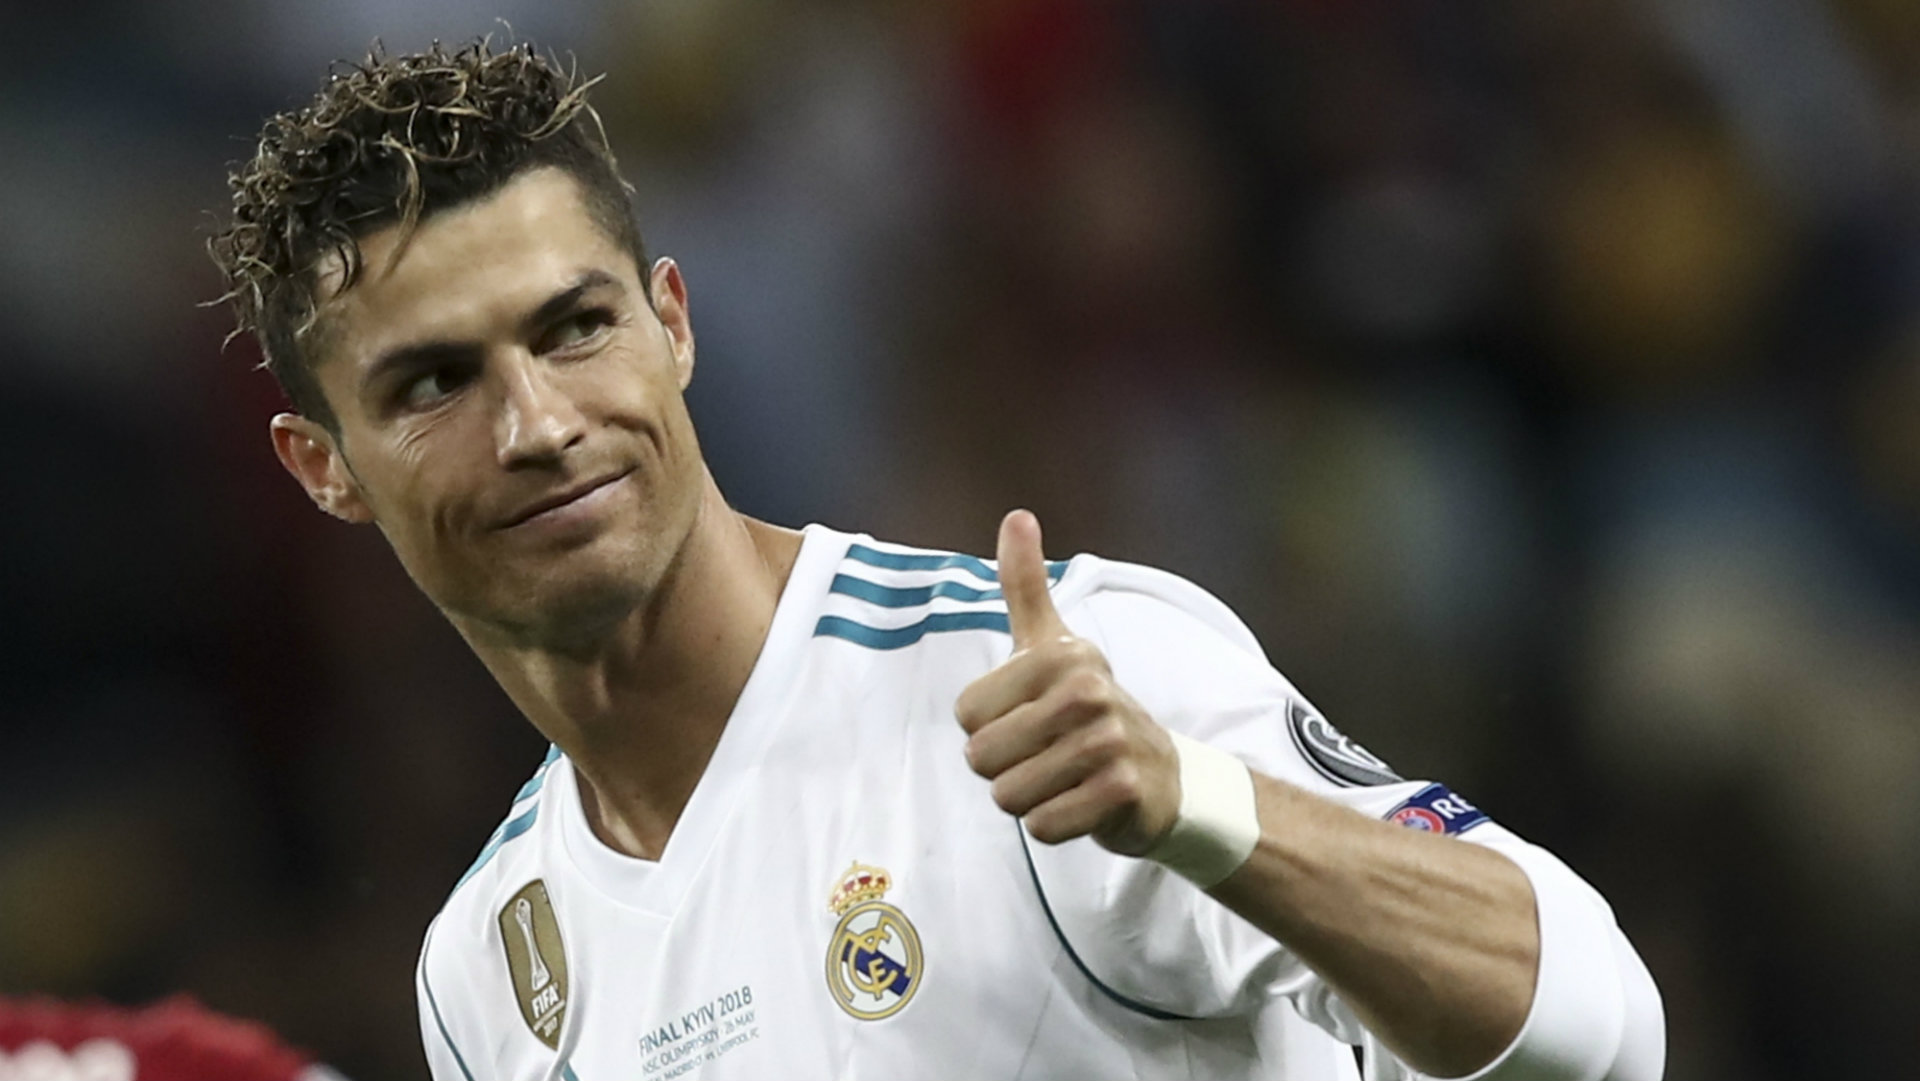 Ronaldo agrees to pay for tax settlement - OrissaPOST